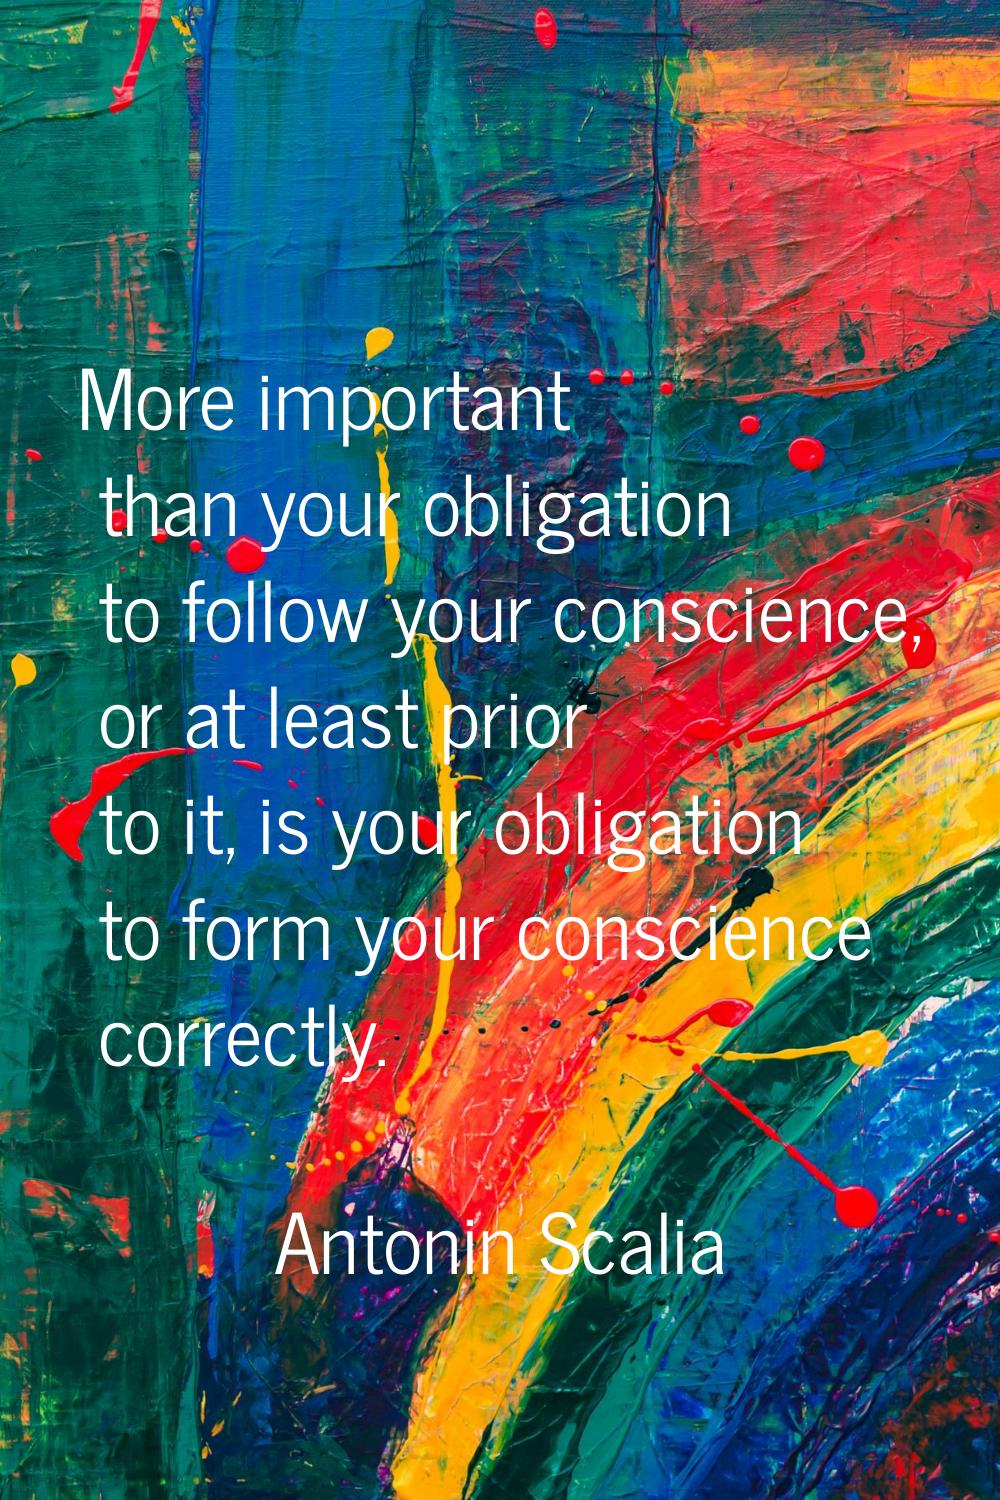 More important than your obligation to follow your conscience, or at least prior to it, is your obl